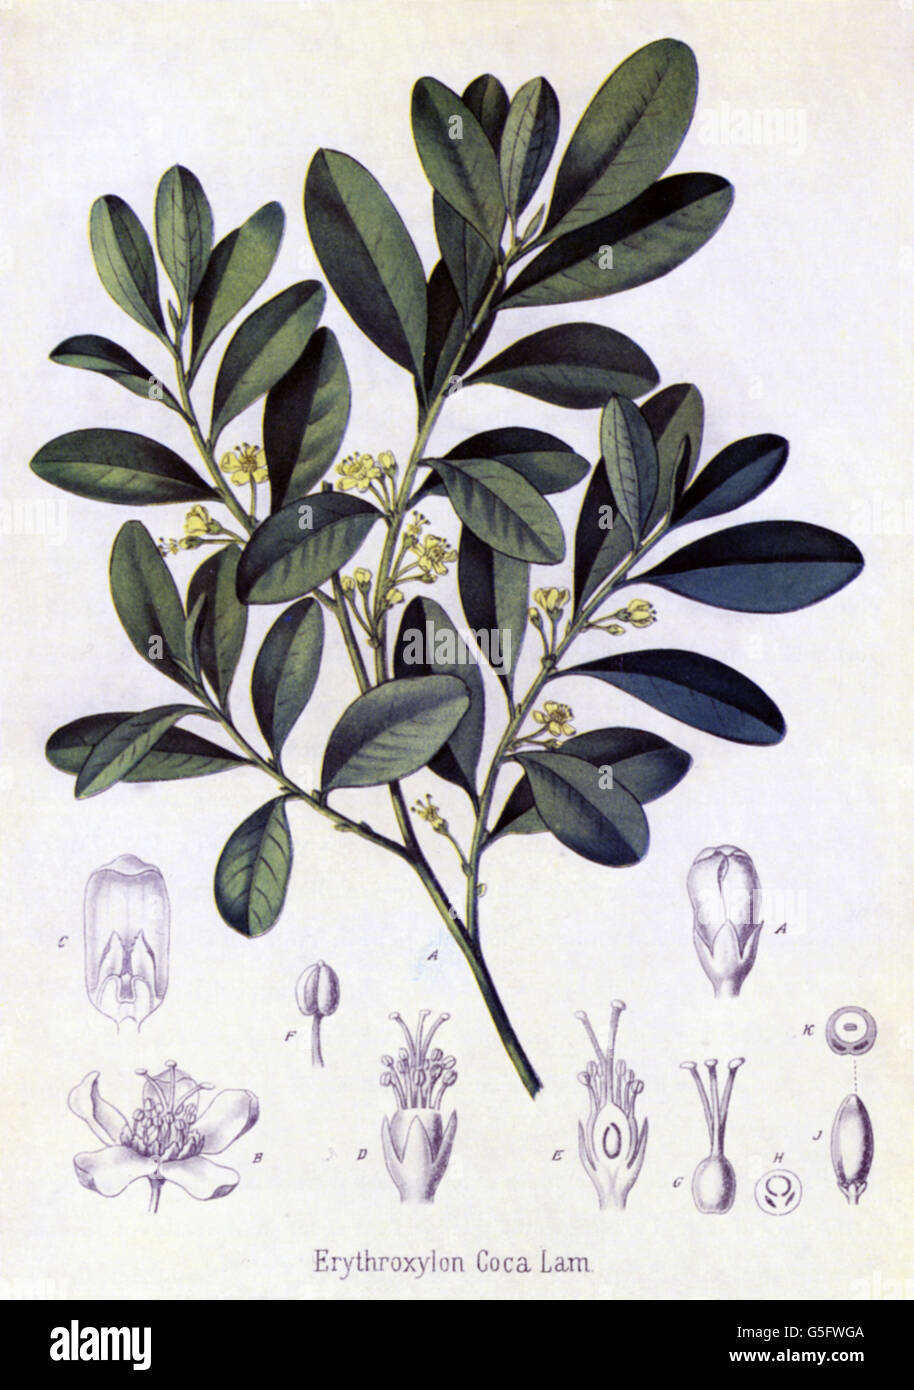 botany, coca bush (Erythroxylum coca), leaves and blossoms, coloured print, 'Atlas der Officinellen Pflanzen' by Michael Berg and C. F. Schmidt, 1893, Additional-Rights-Clearences-Not Available Stock Photo